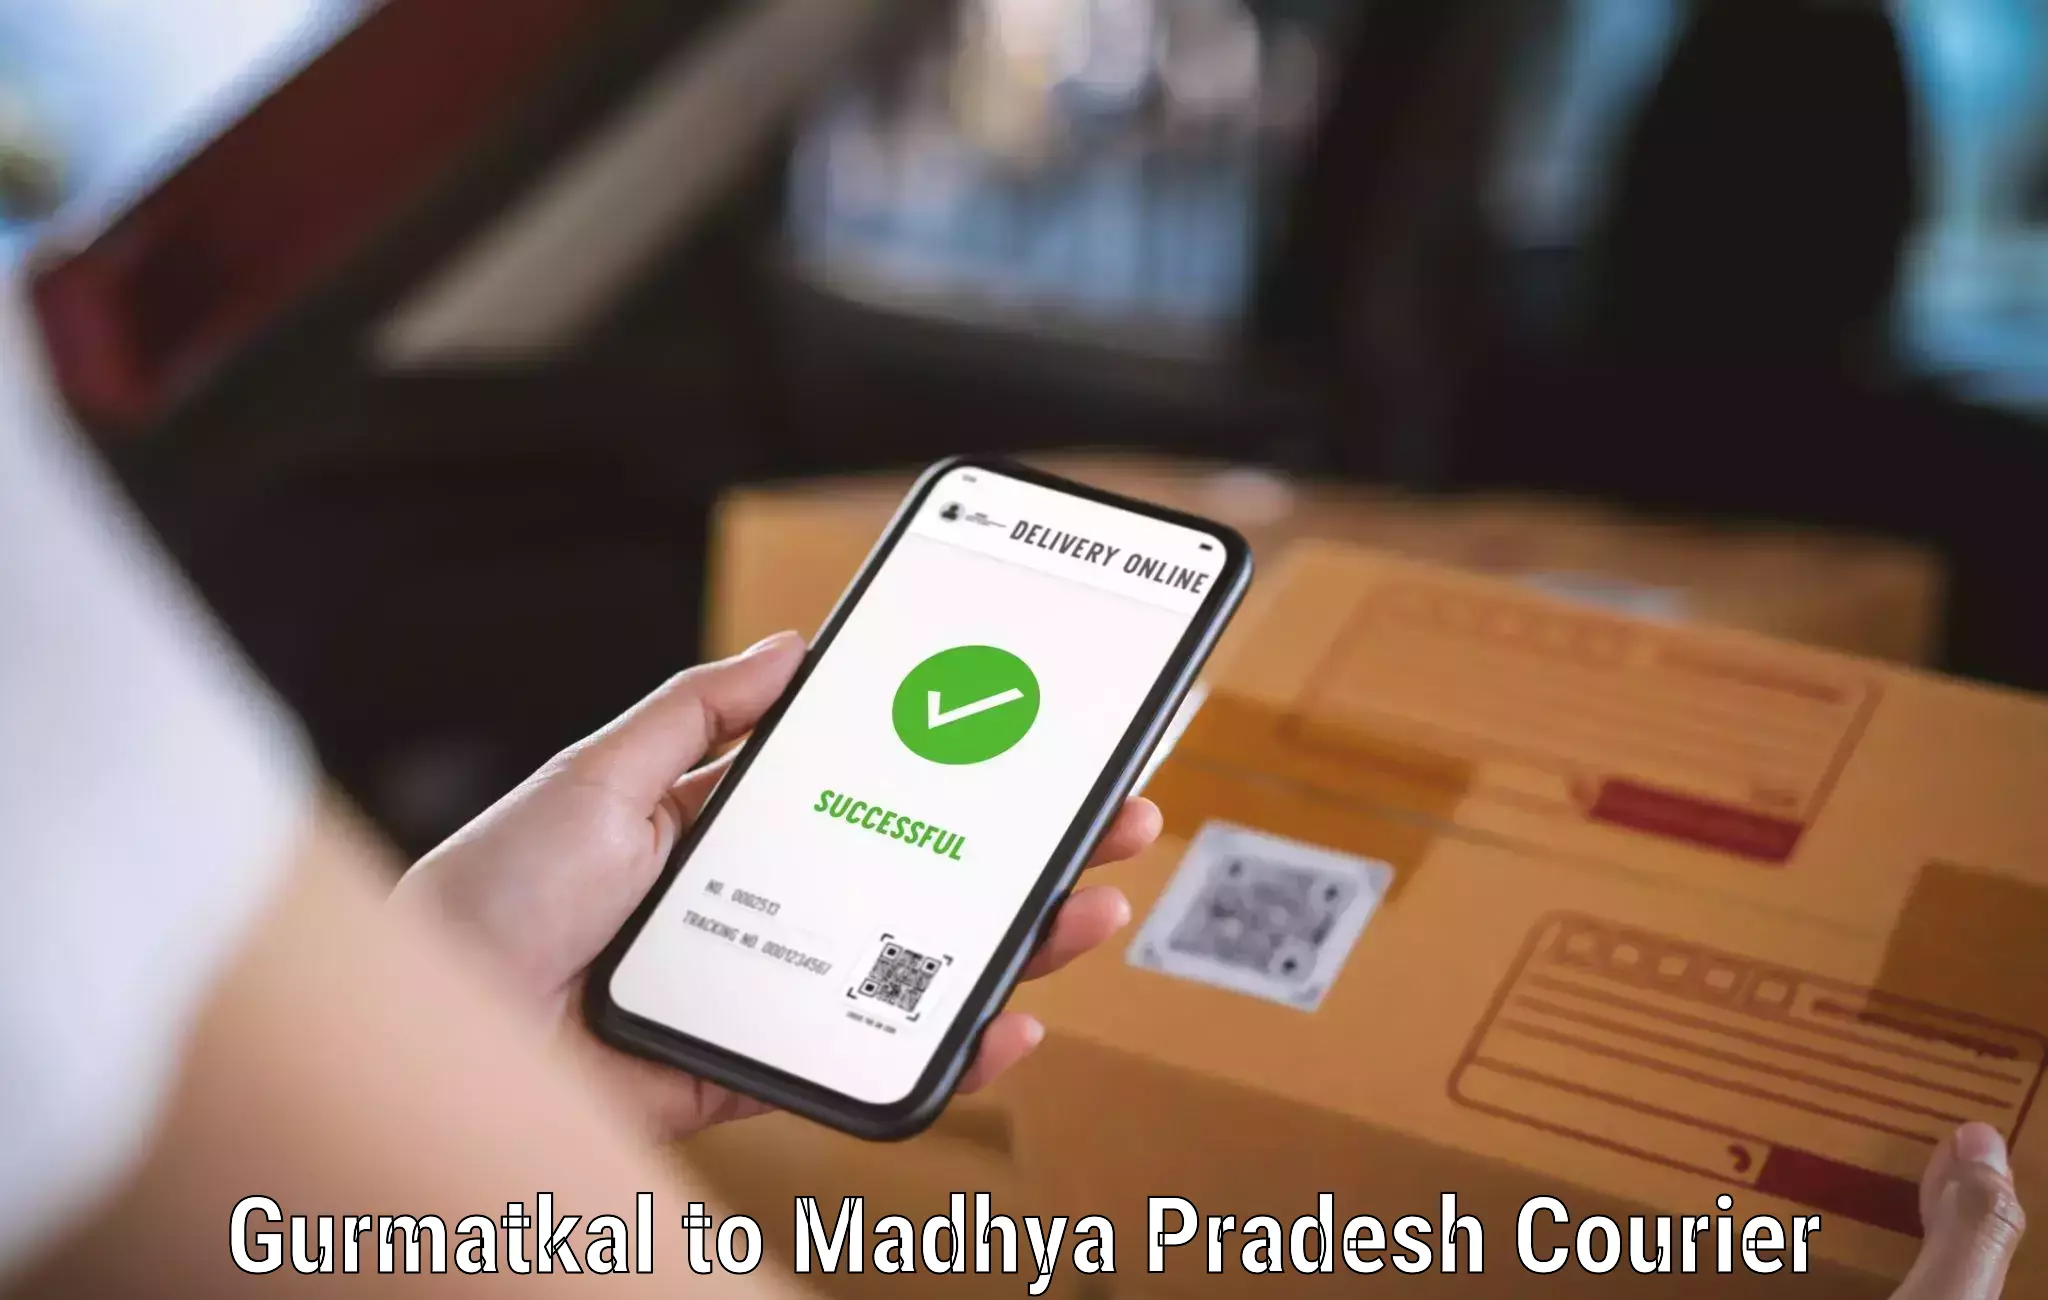 Courier services in Gurmatkal to Mandla